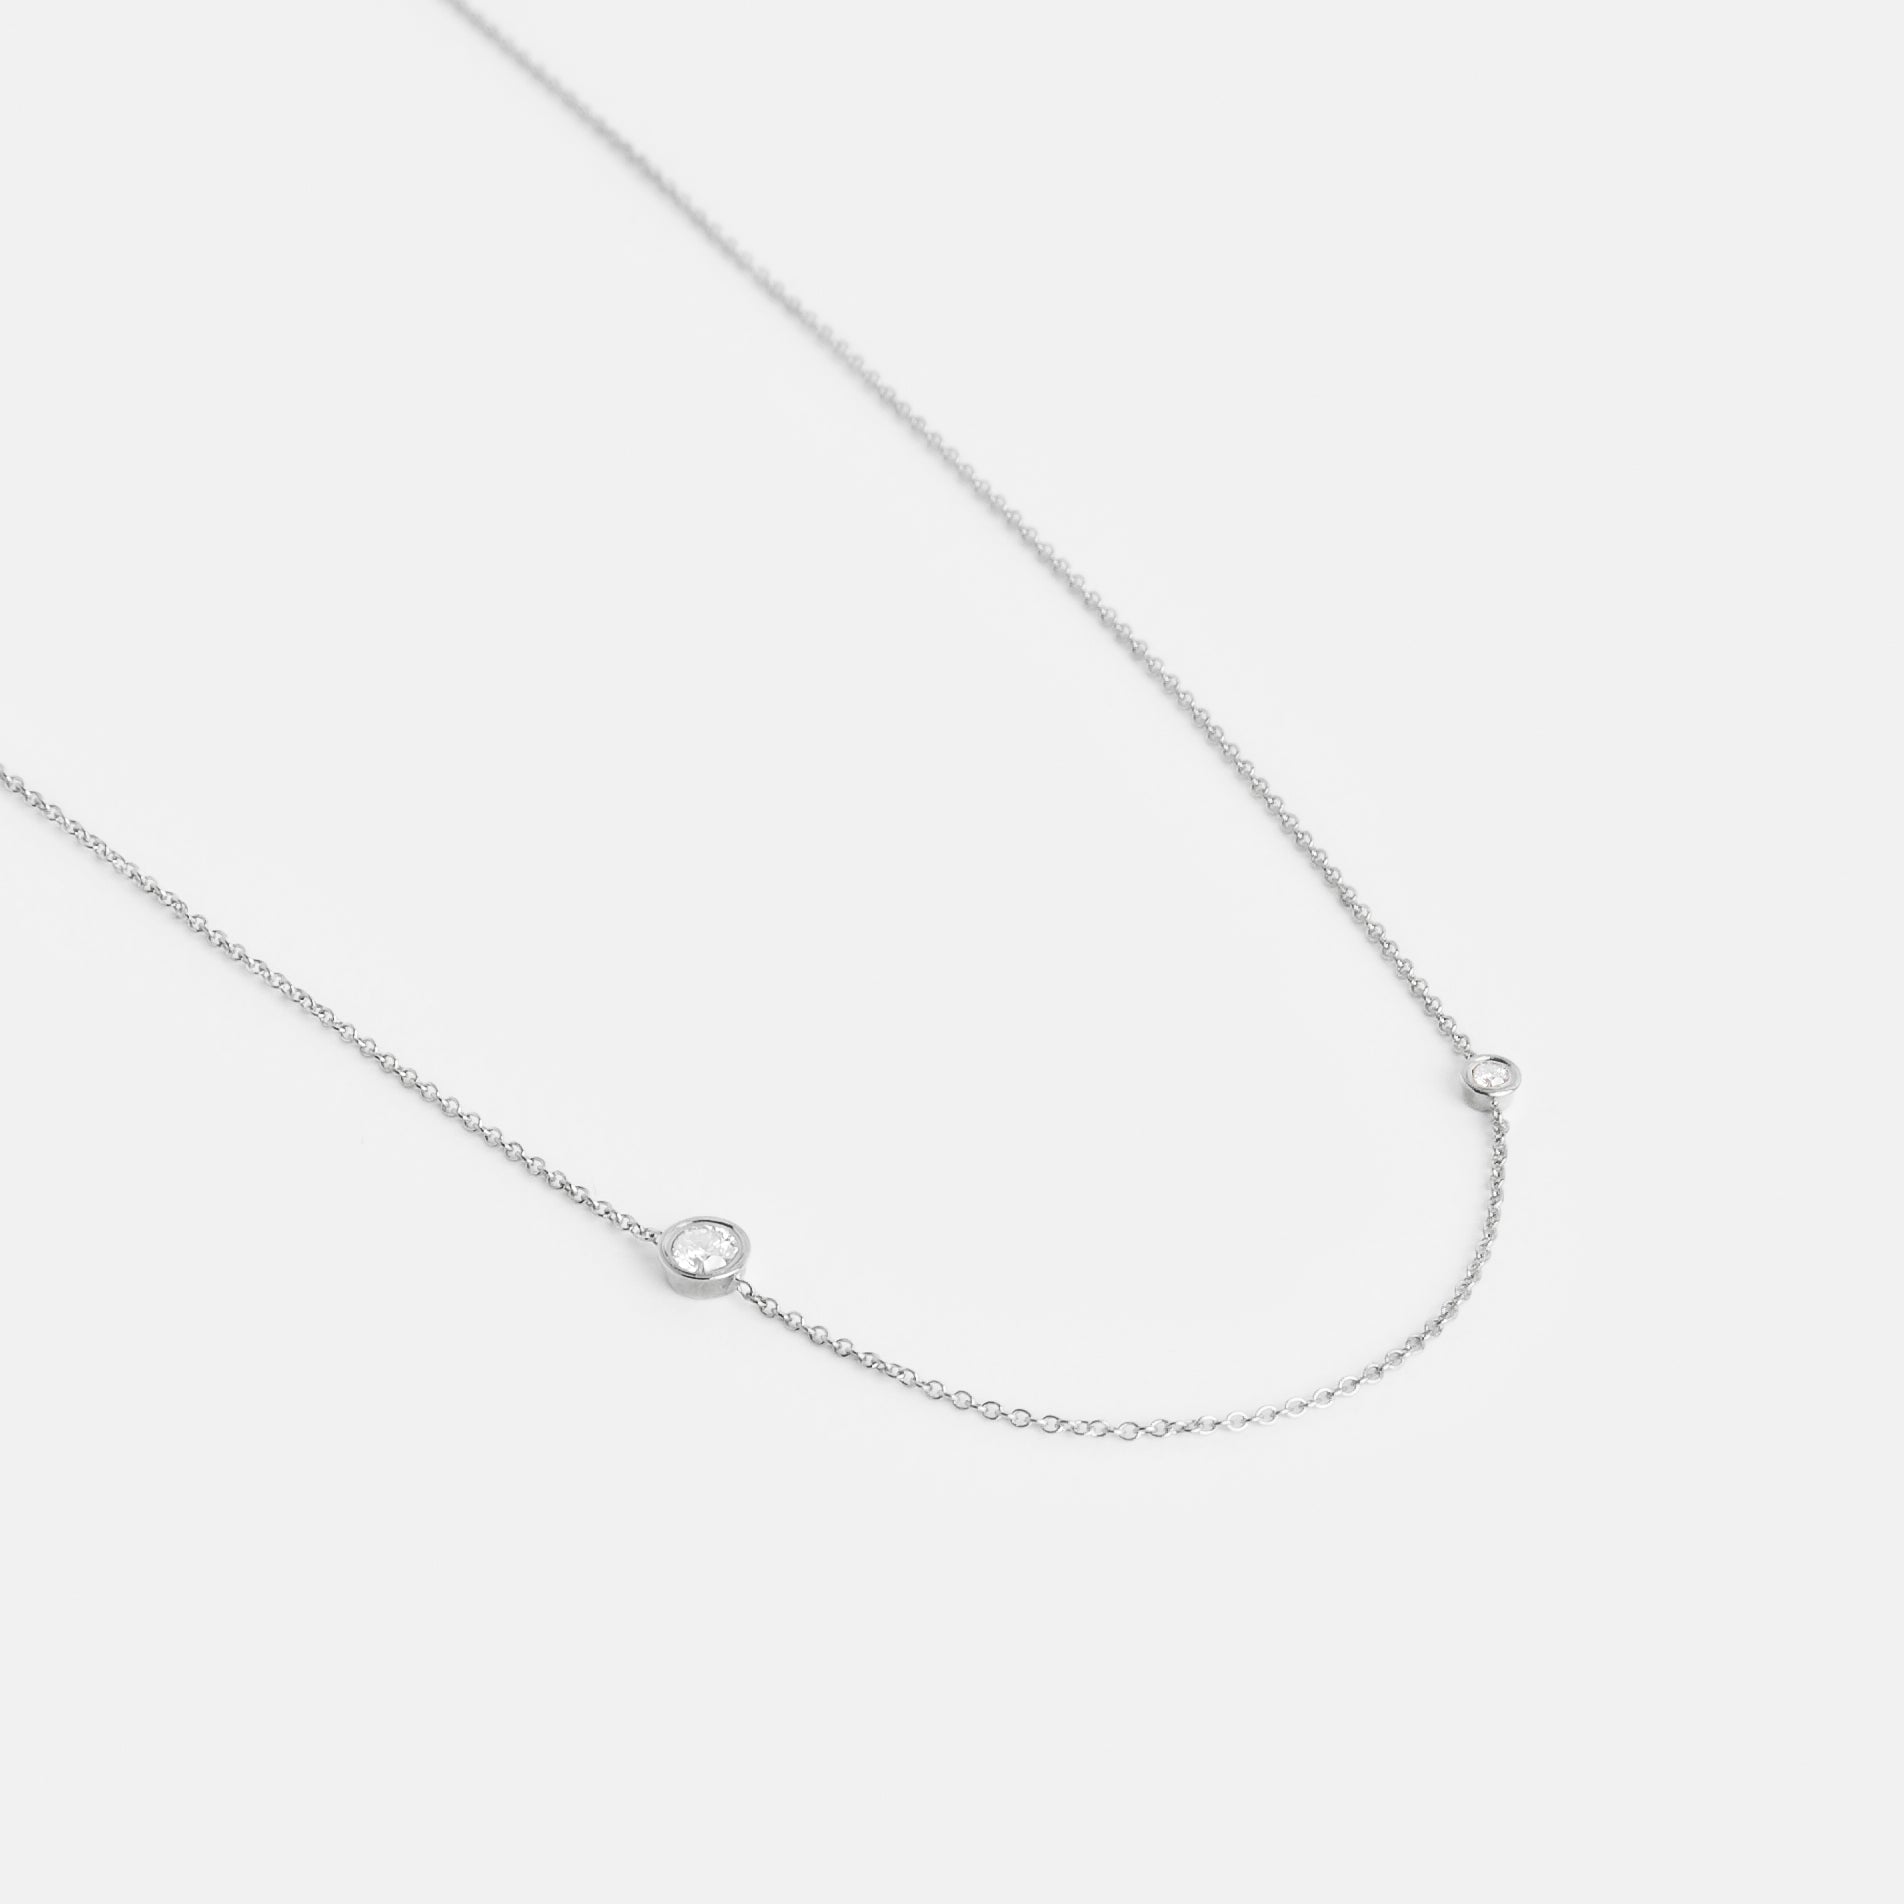 Iba Alternative Necklace in Sterling Silver set with White Diamond By SHW Fine Jewelry NYC